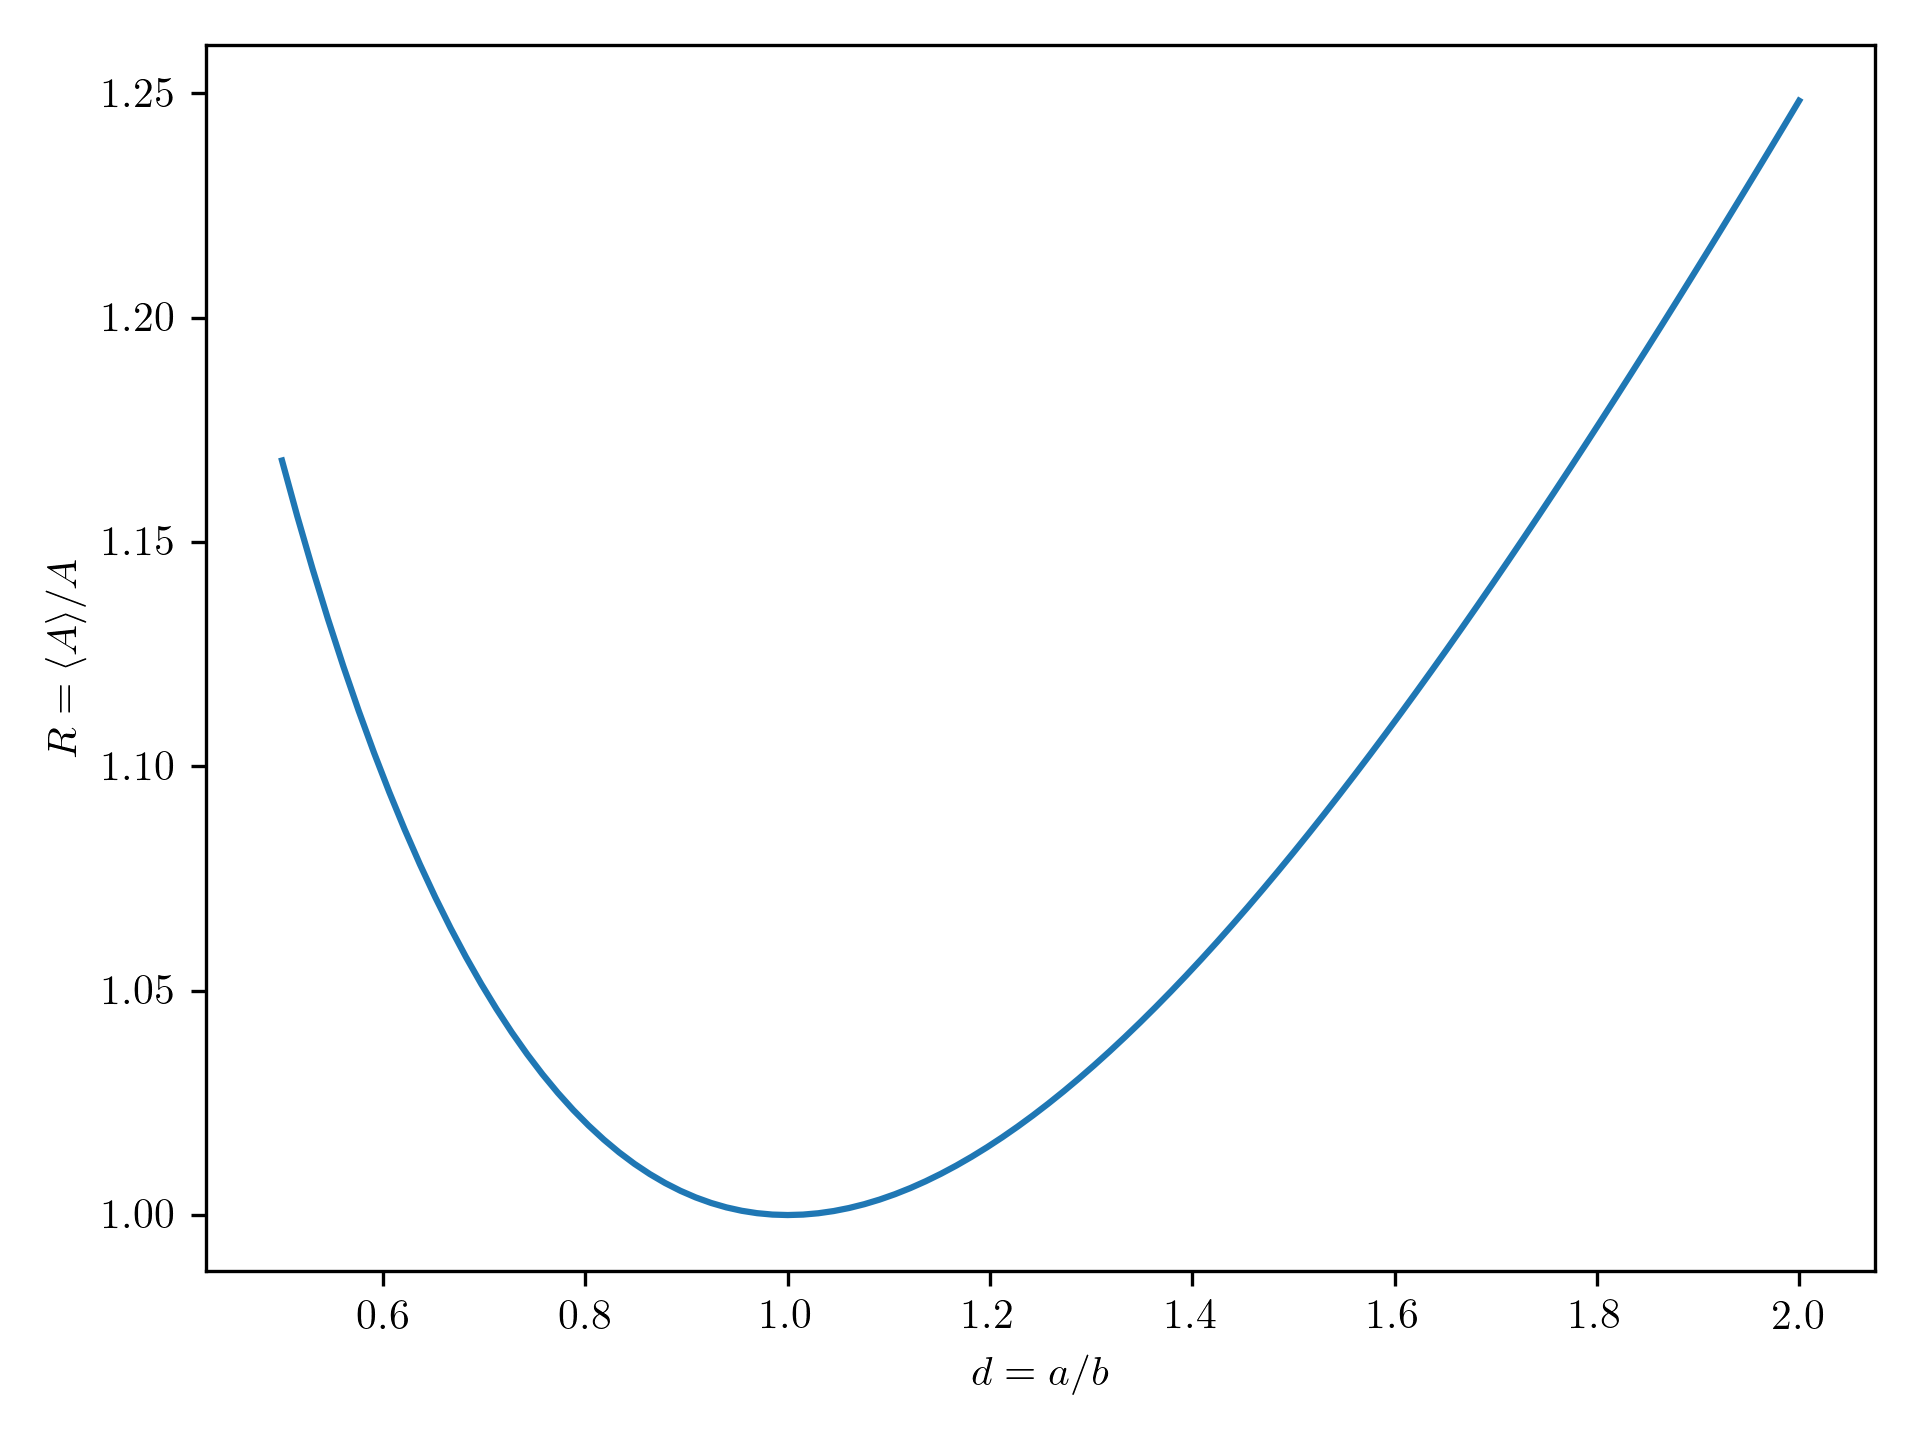 Image of R as a function of d